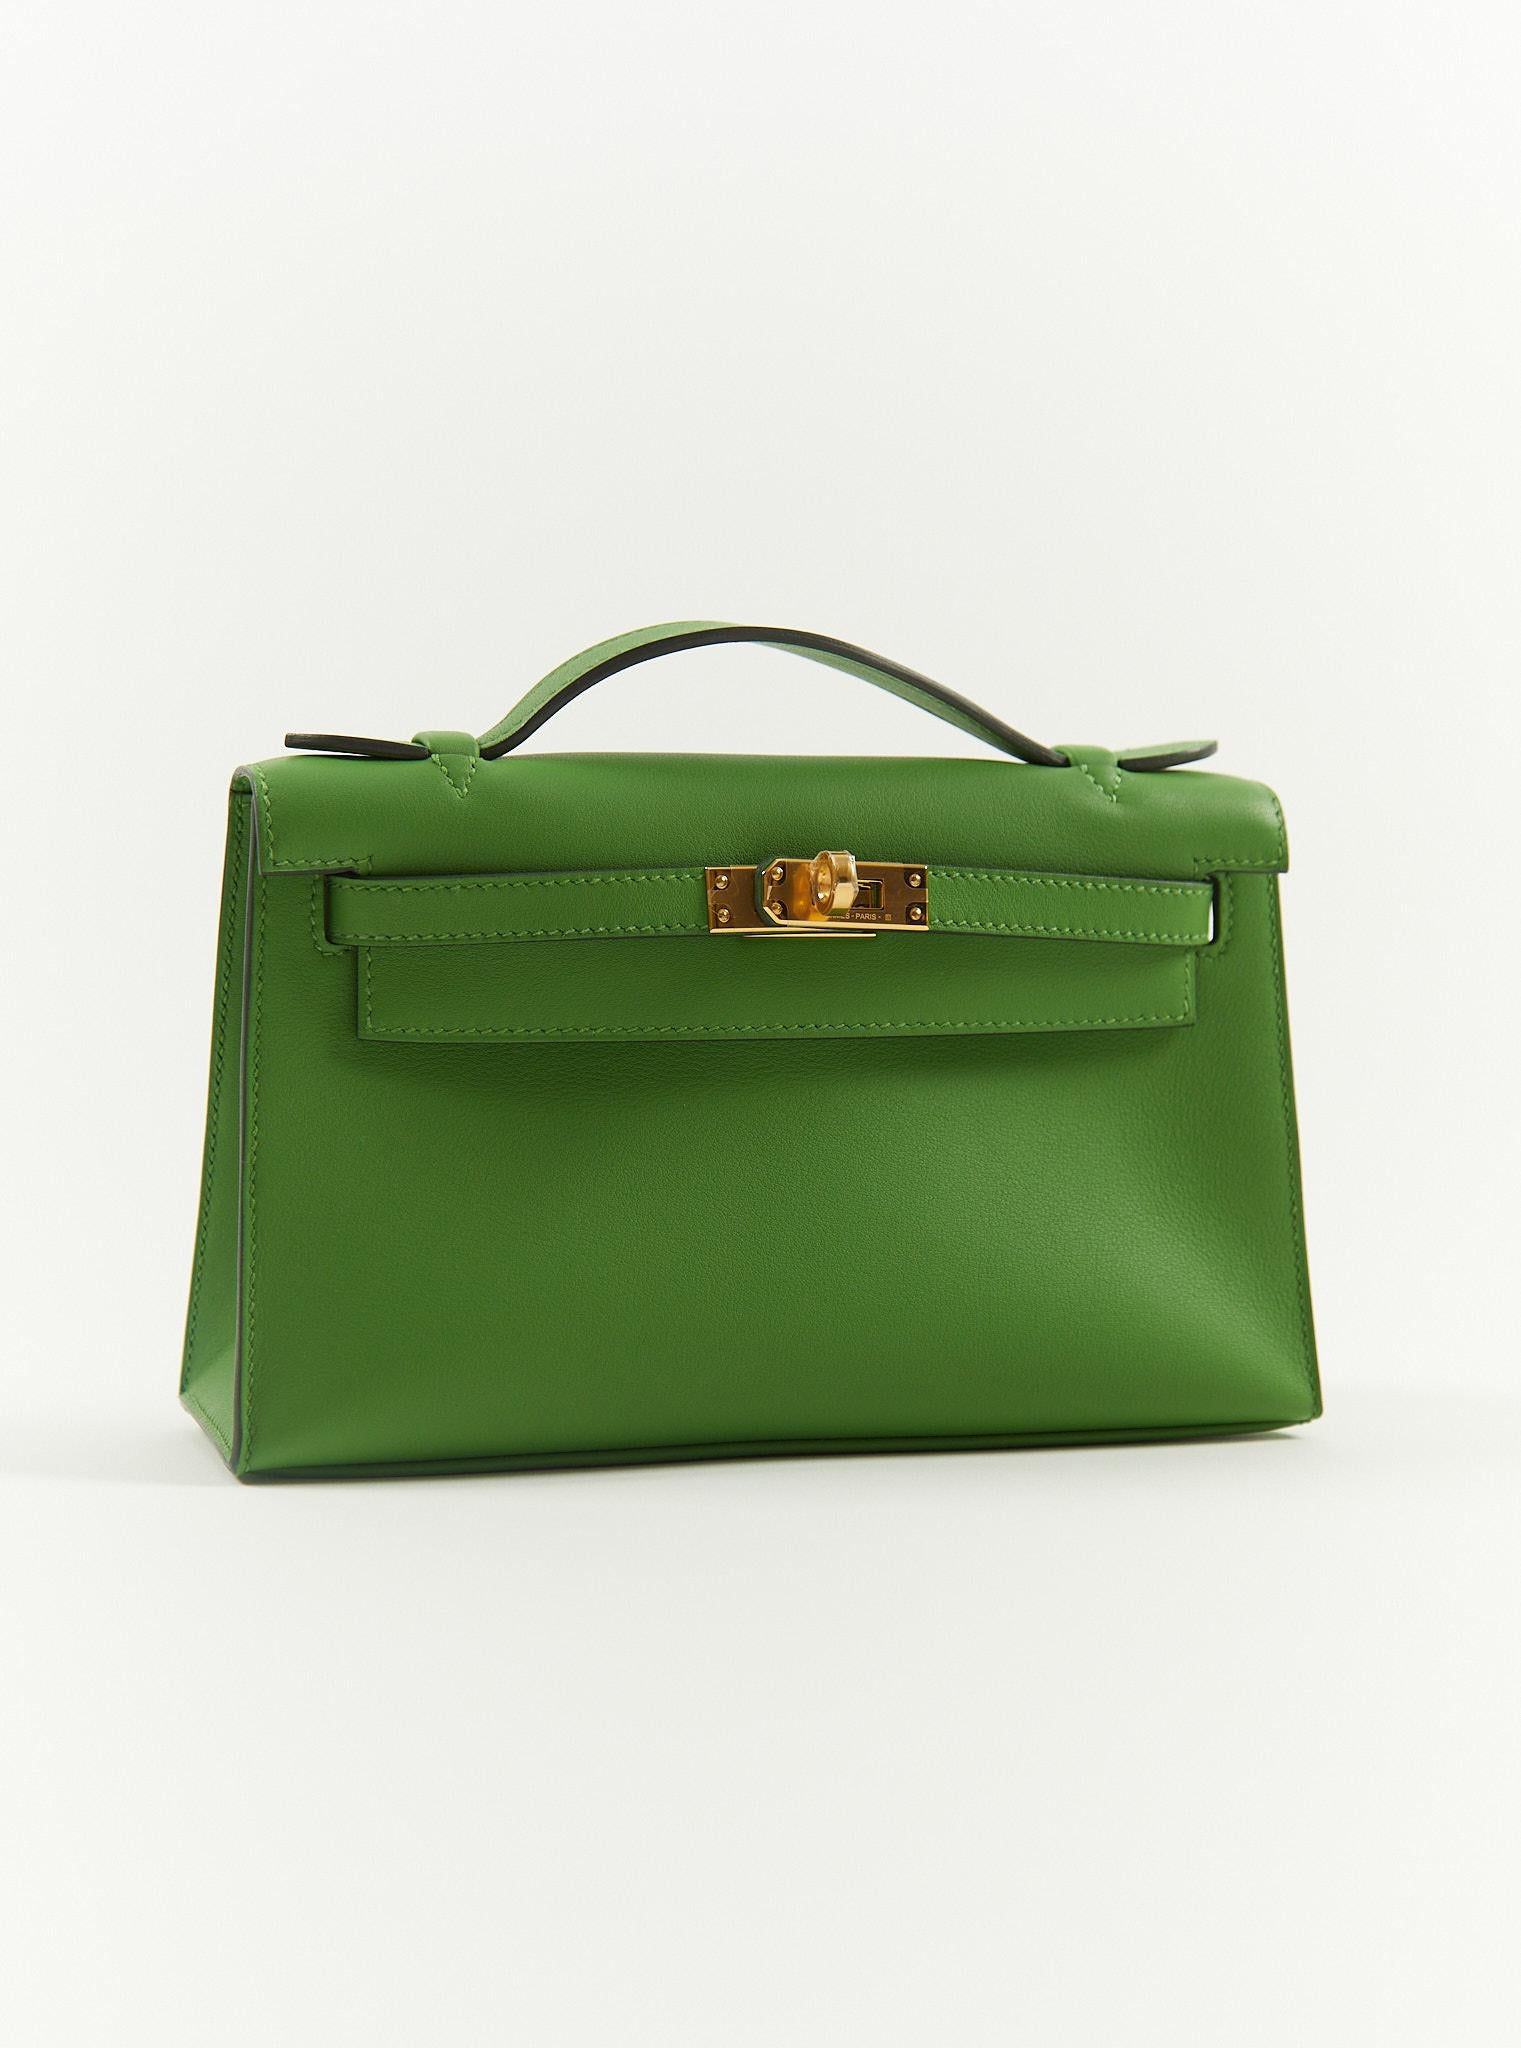 Hermès Kelly Pochette in Vert Yucca

Swift Leather with Gold Hardware

W Stamp / 2024

Accompanied by: Original receipt, Hermes box, Hermes dustbag, felt, ribbon and care card

Measurements: 8.5